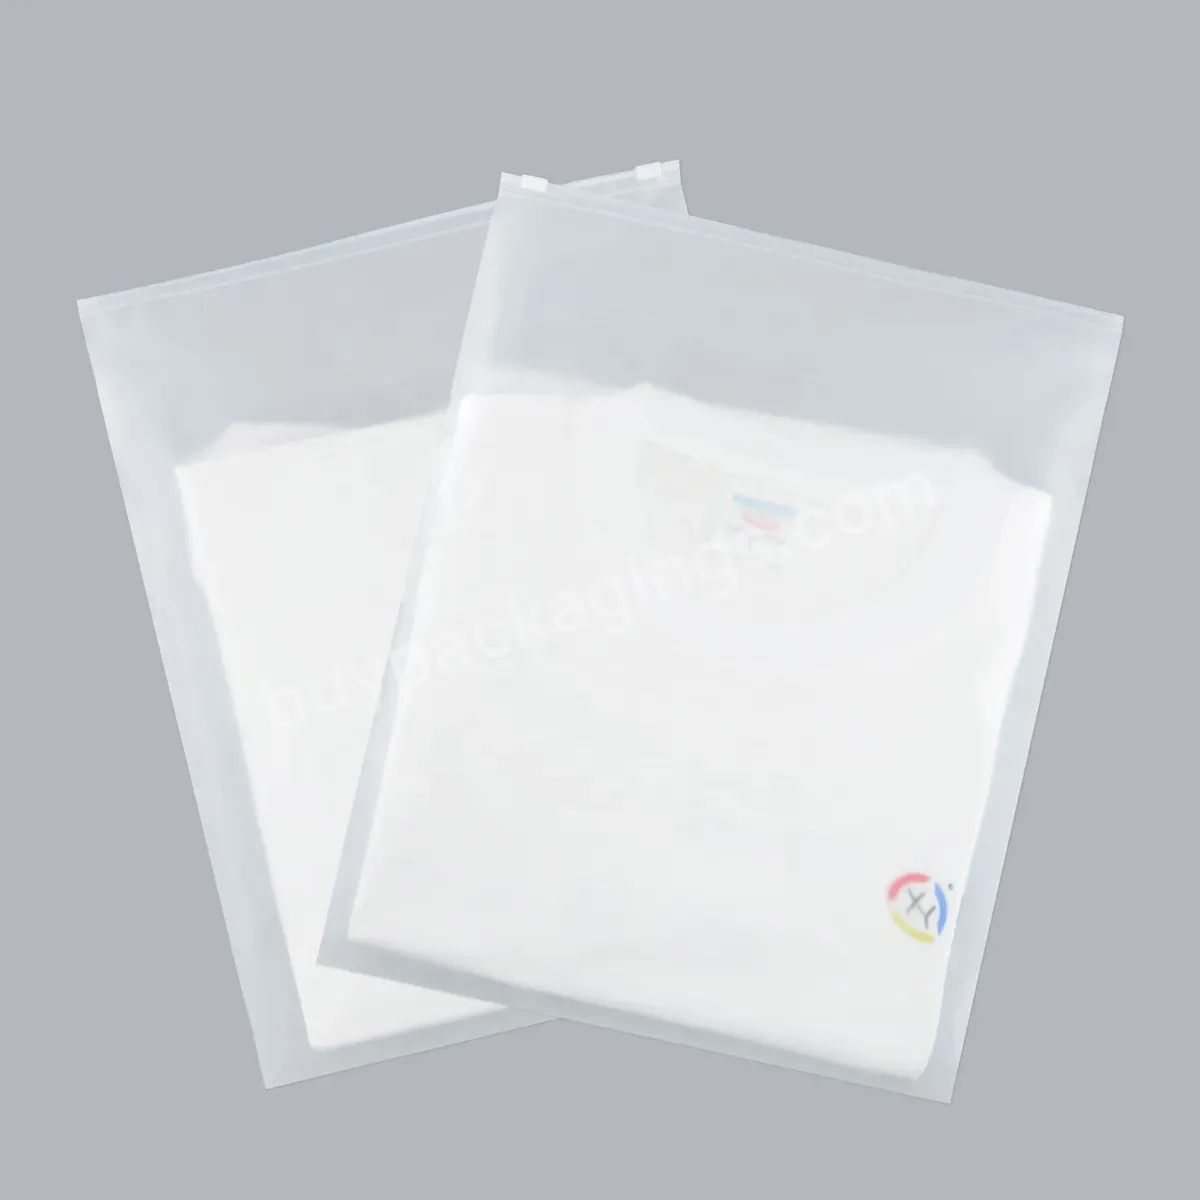 17*25cm Custom Printed Frosted Clear Zipper Plastic Bag Clothing Packaging Zip Lock Bags Shipping Packages - Buy Printed Zip Lock Plastic Bags,Frosted Clothing Bags,Zip Lock Bags For Clothes.